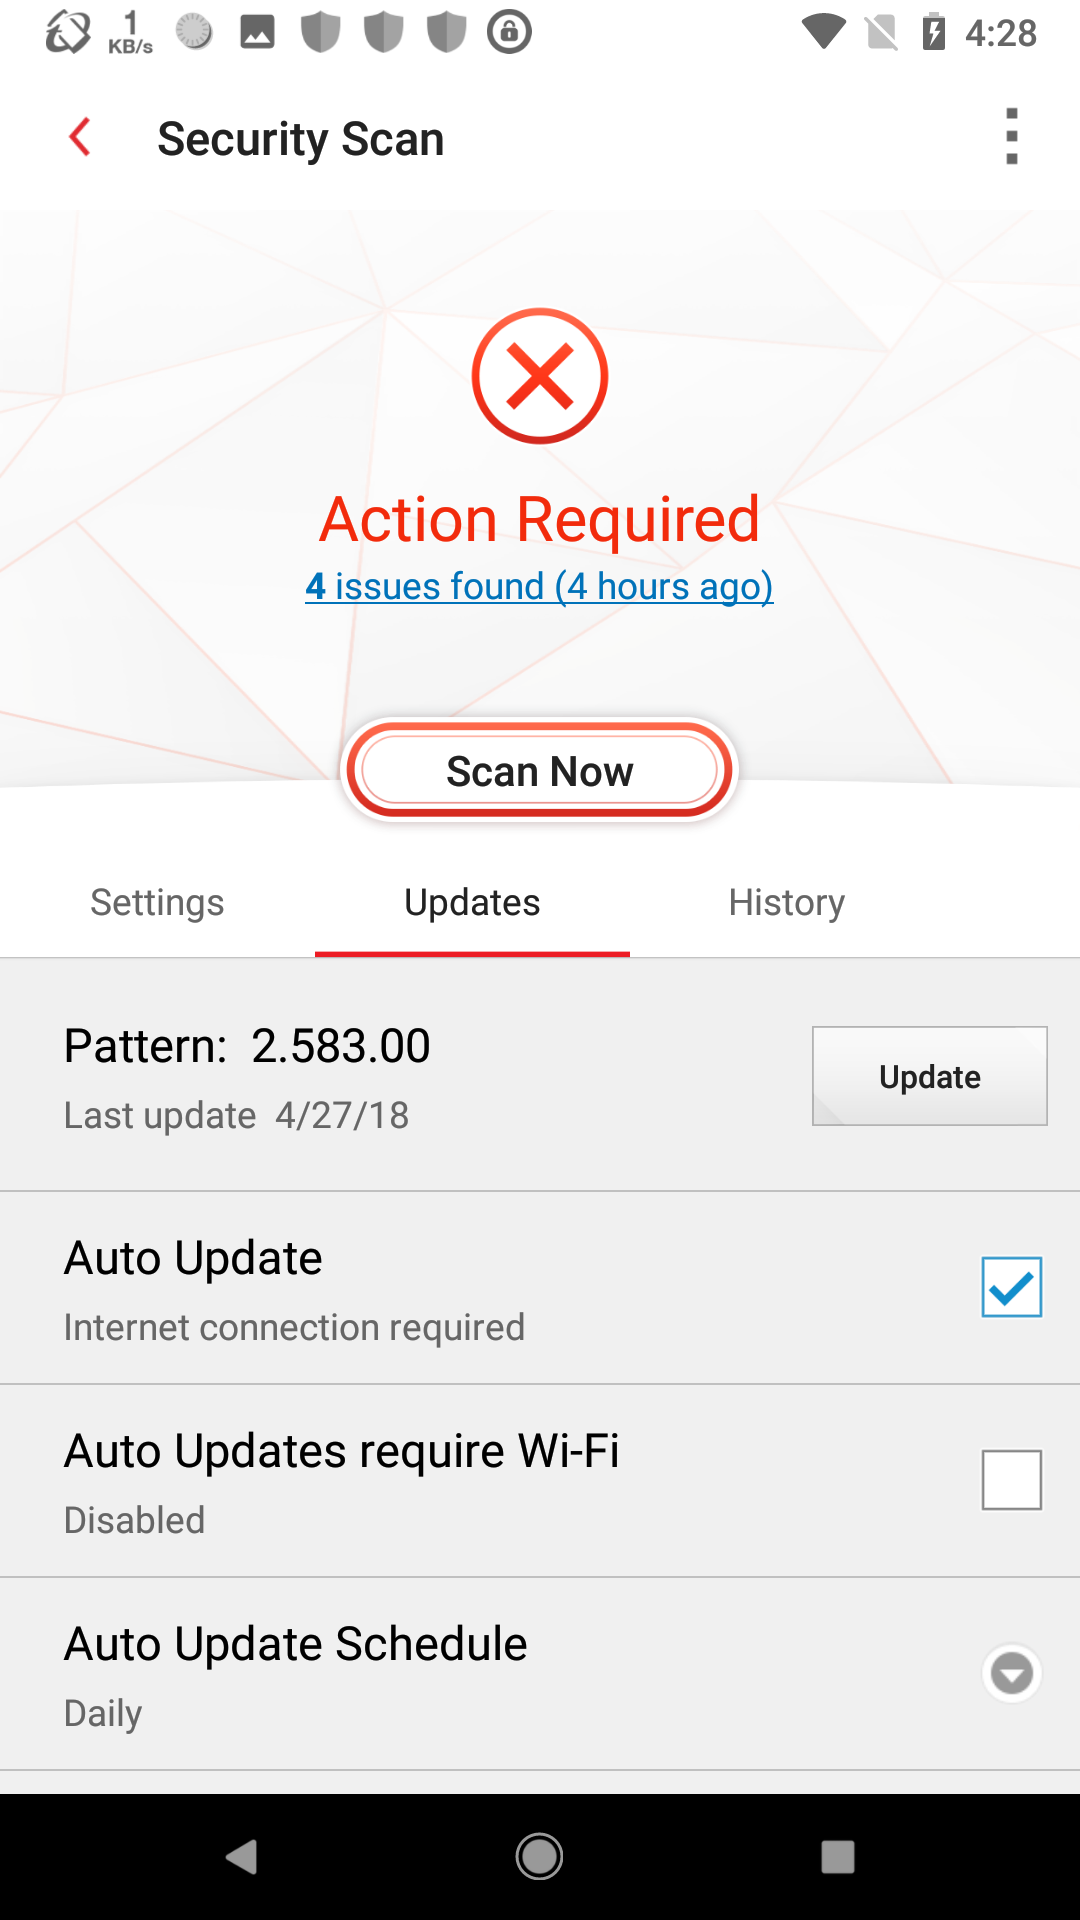 Disable Auto Update